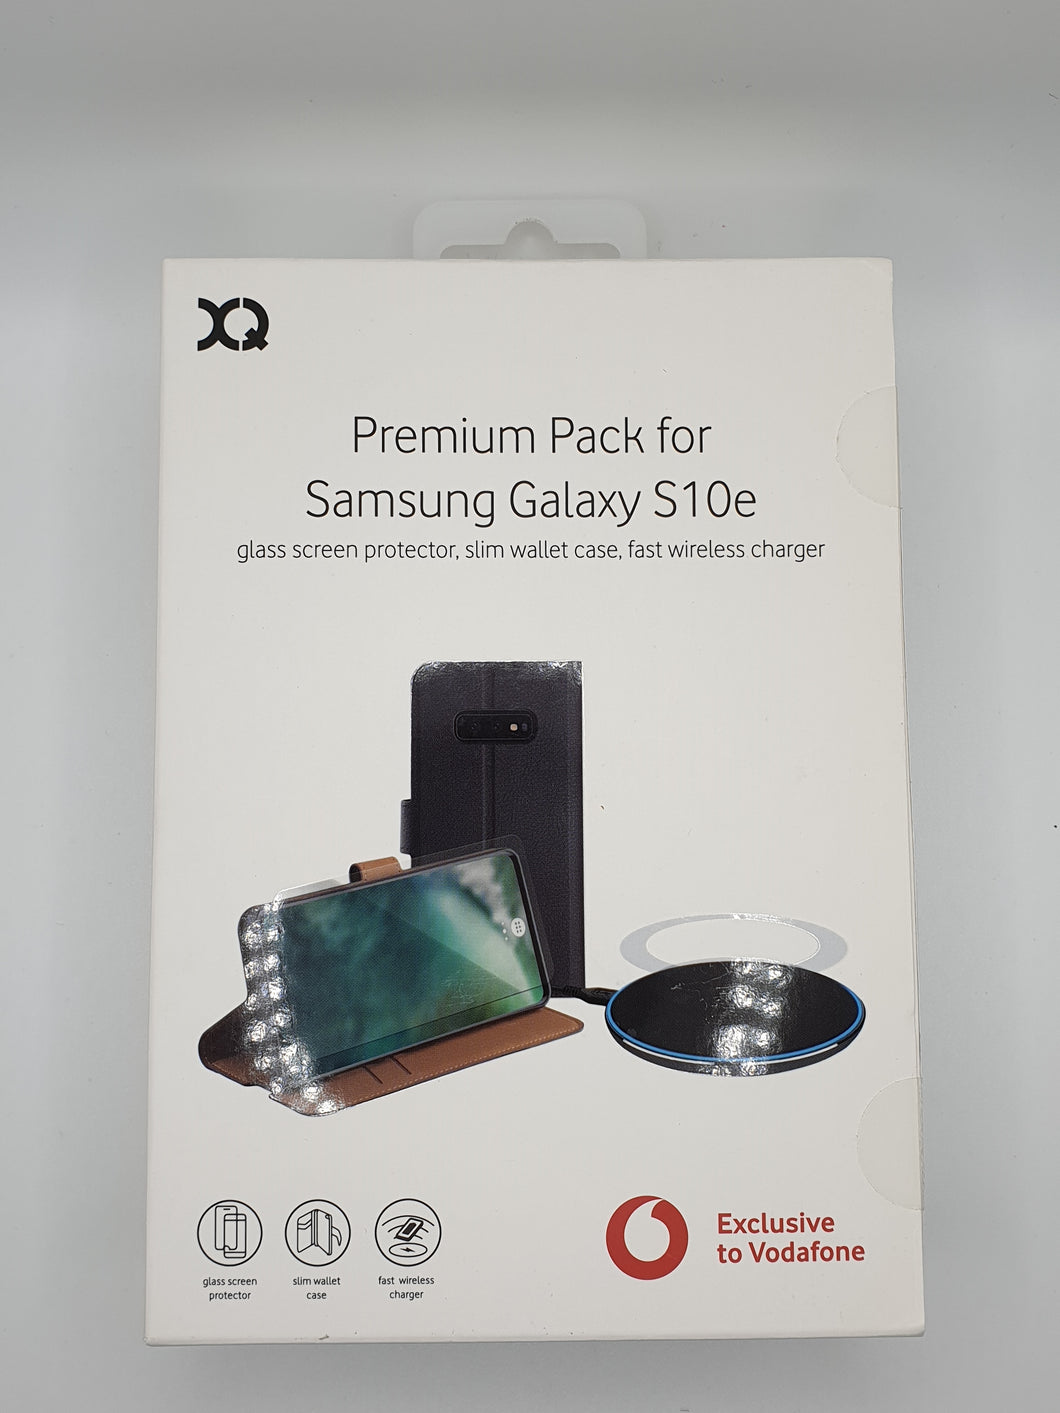 Samsung Galaxy S10e Premium Pack Glass Screen Protector, Slim Wallet Case, Fast Wireless Charger